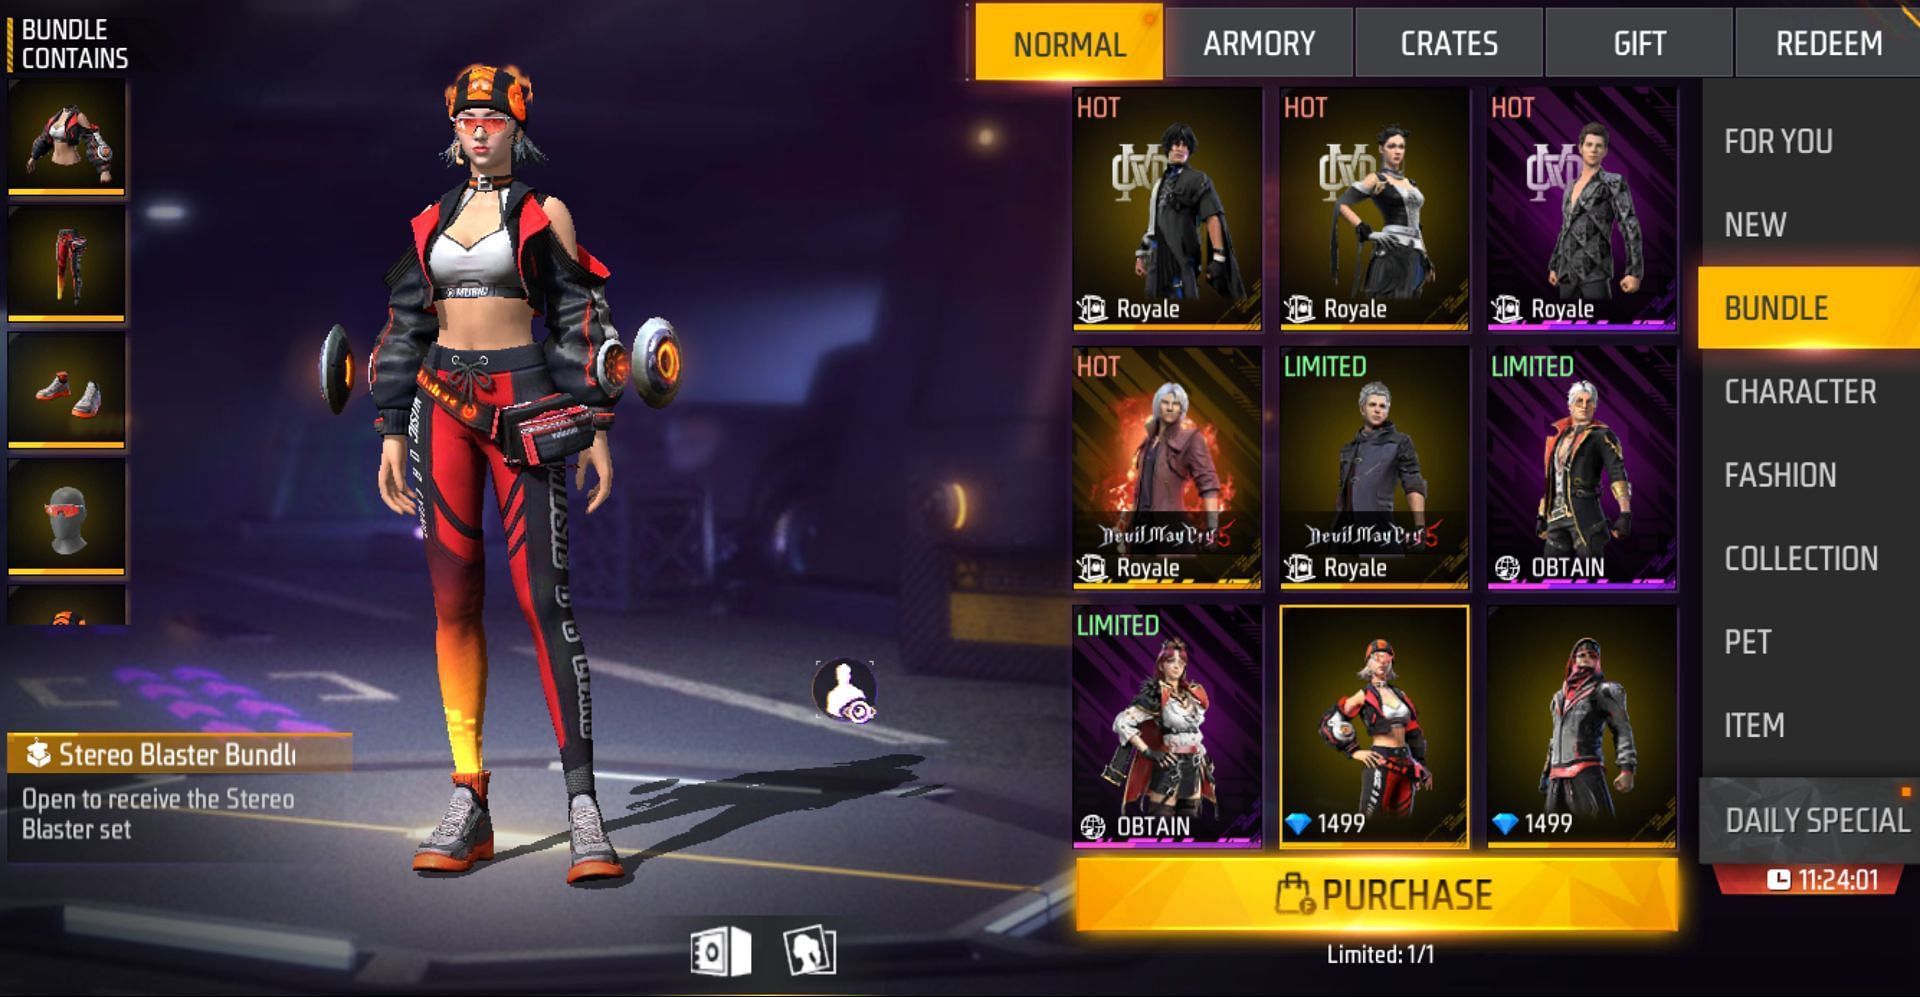 A wide variety of outfits are accessible in the game (Image via Garena)